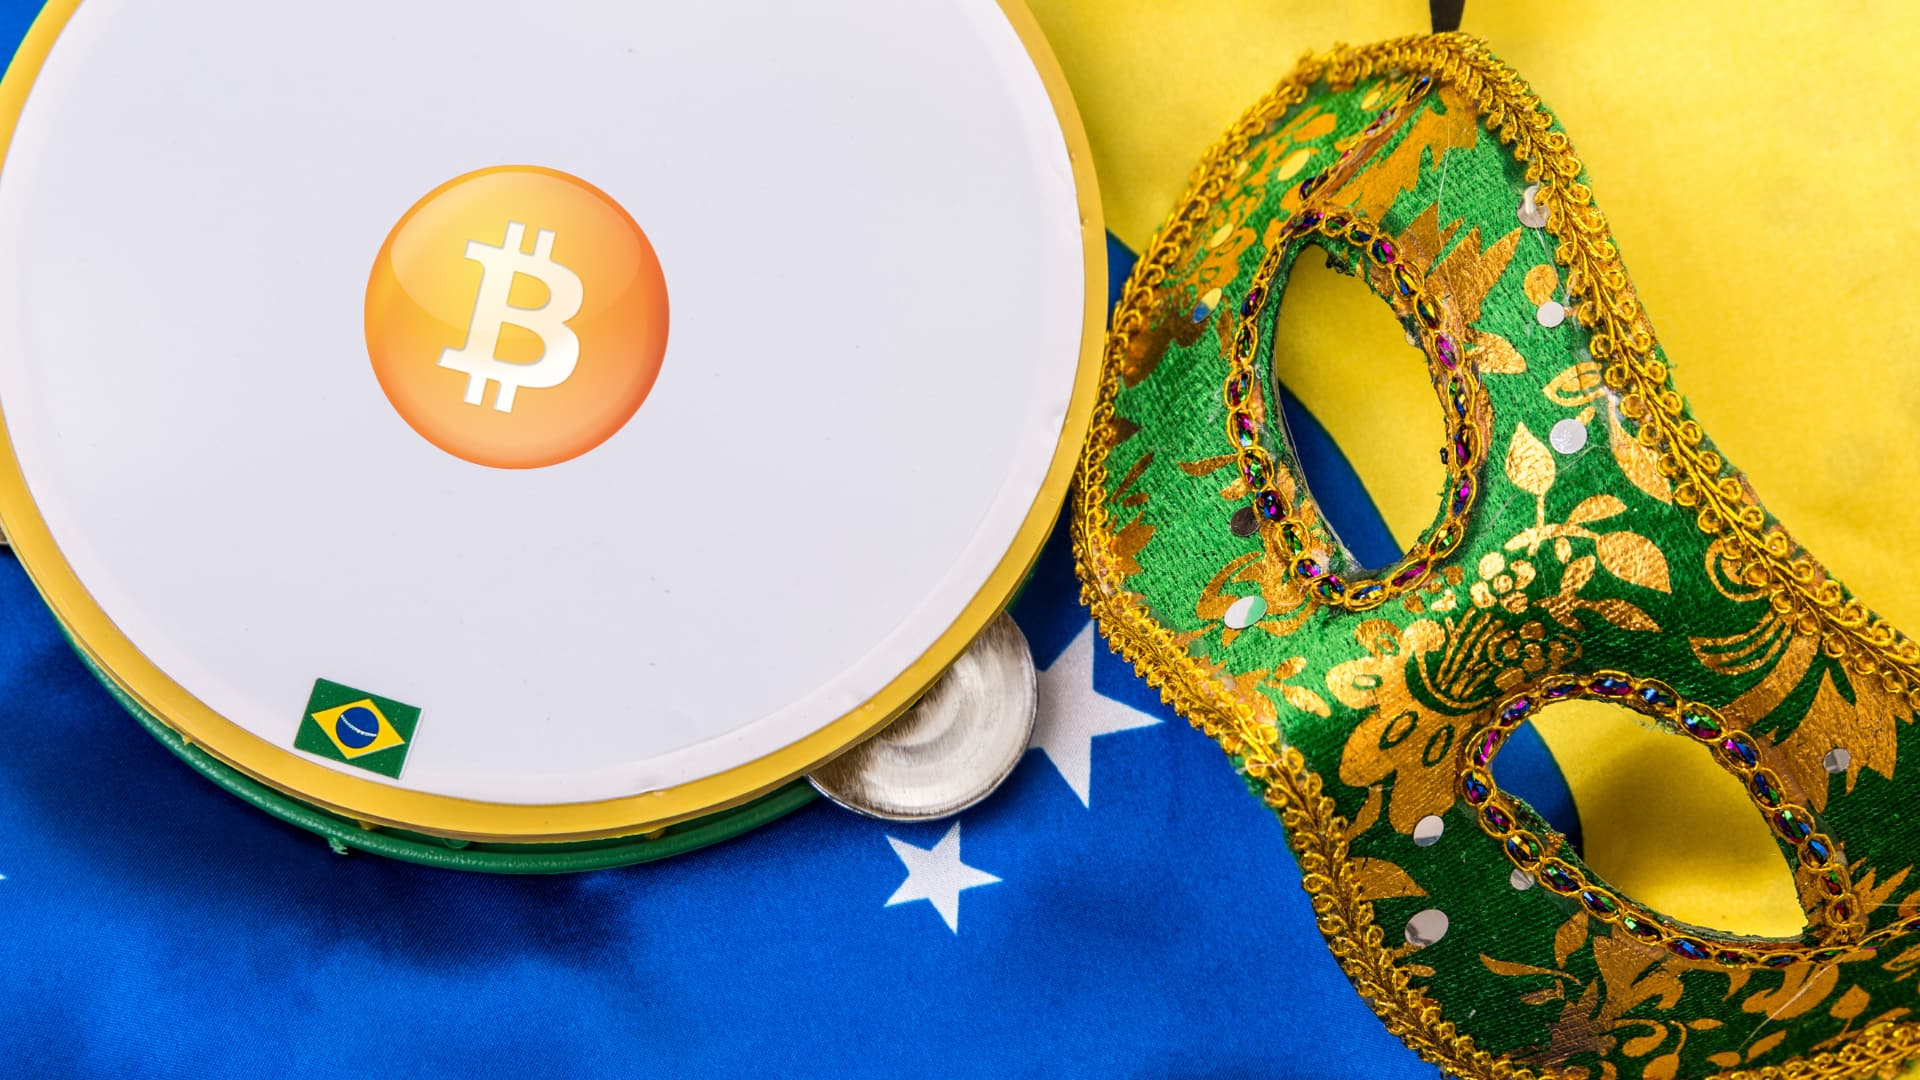 Rio Carnival Includes Bitcoin in Social Commentary on Money